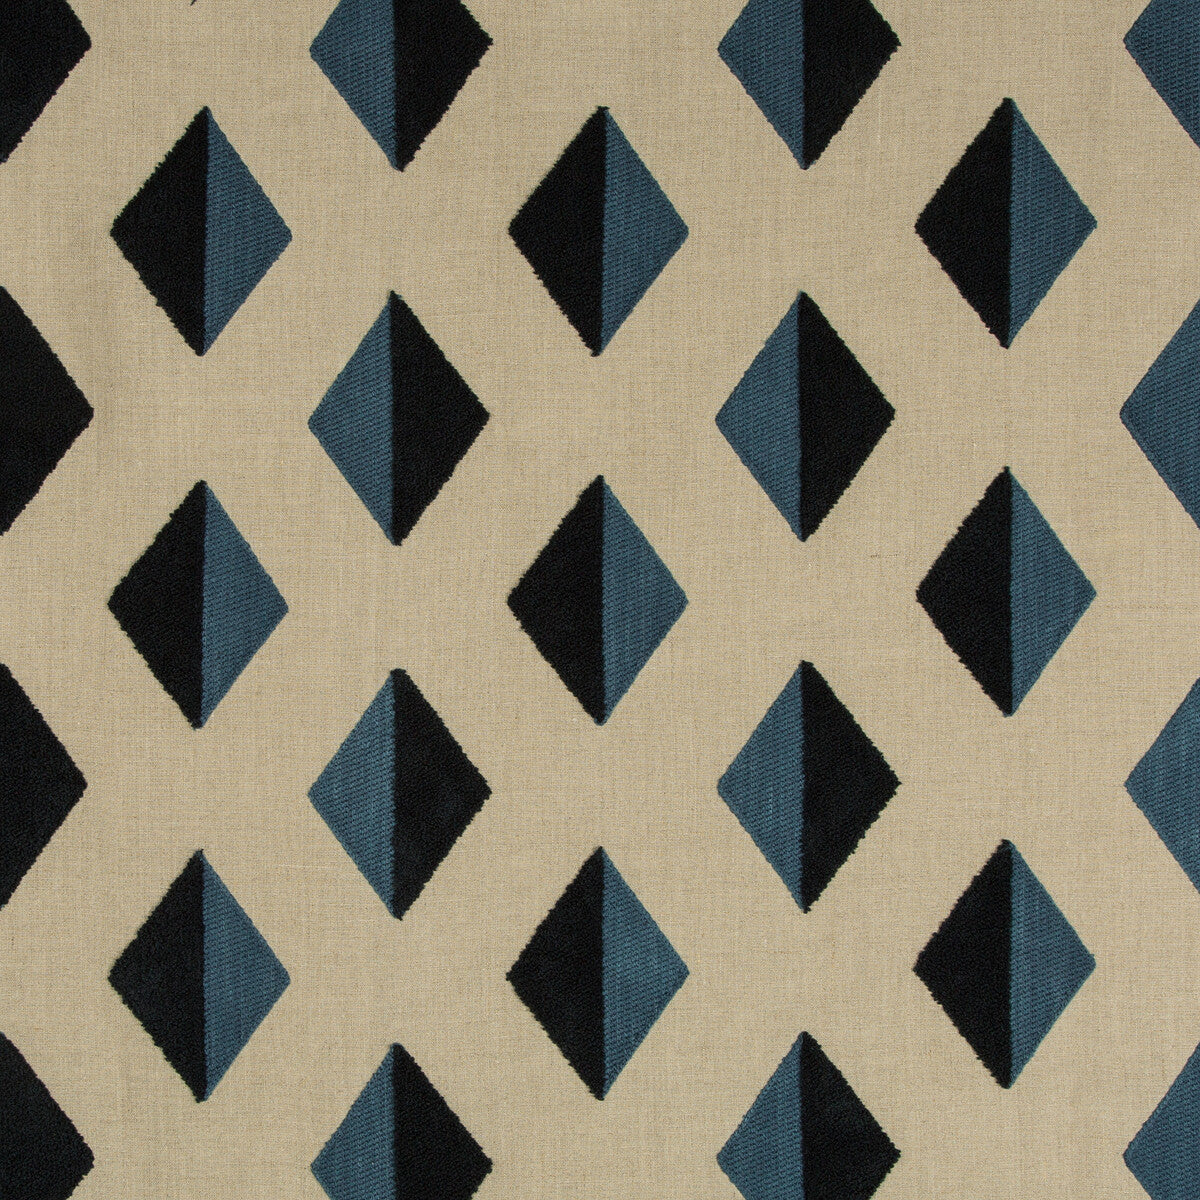 Barroco Boucle fabric in denim color - pattern 35389.516.0 - by Kravet Design in the Nate Berkus Well-Traveled collection